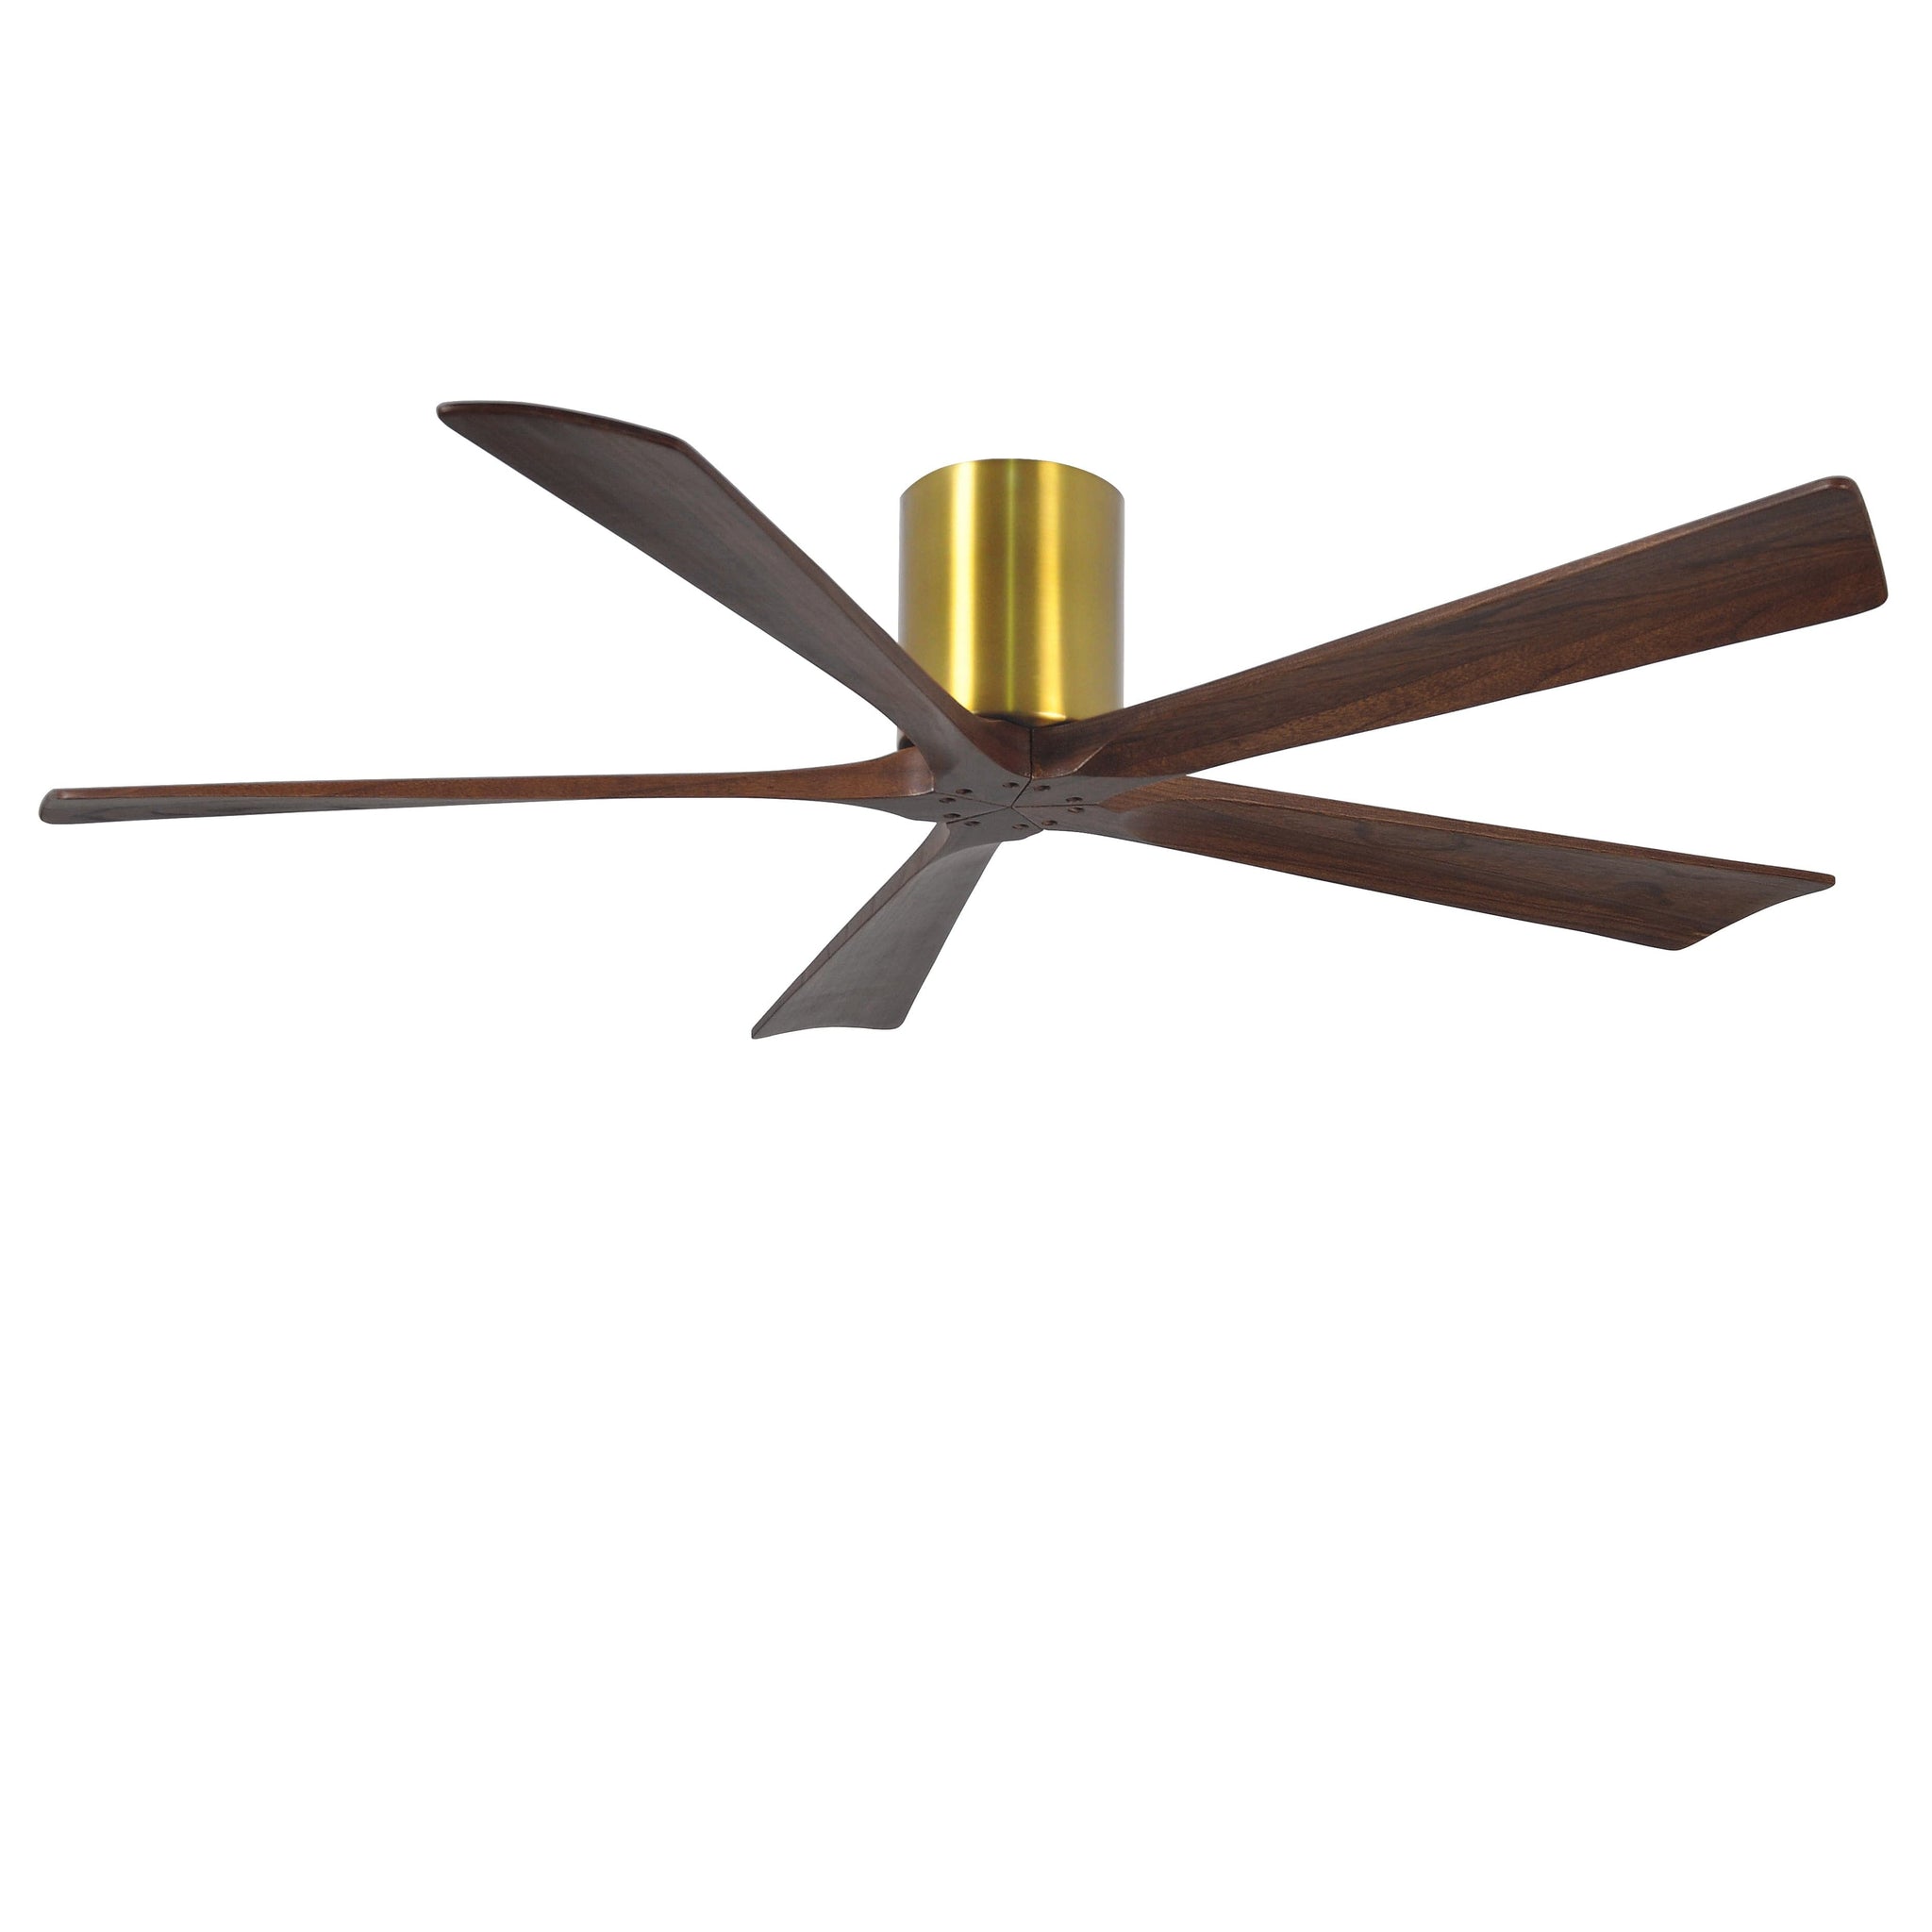 Shown in Brushed Brass with Walnut Tone Blades